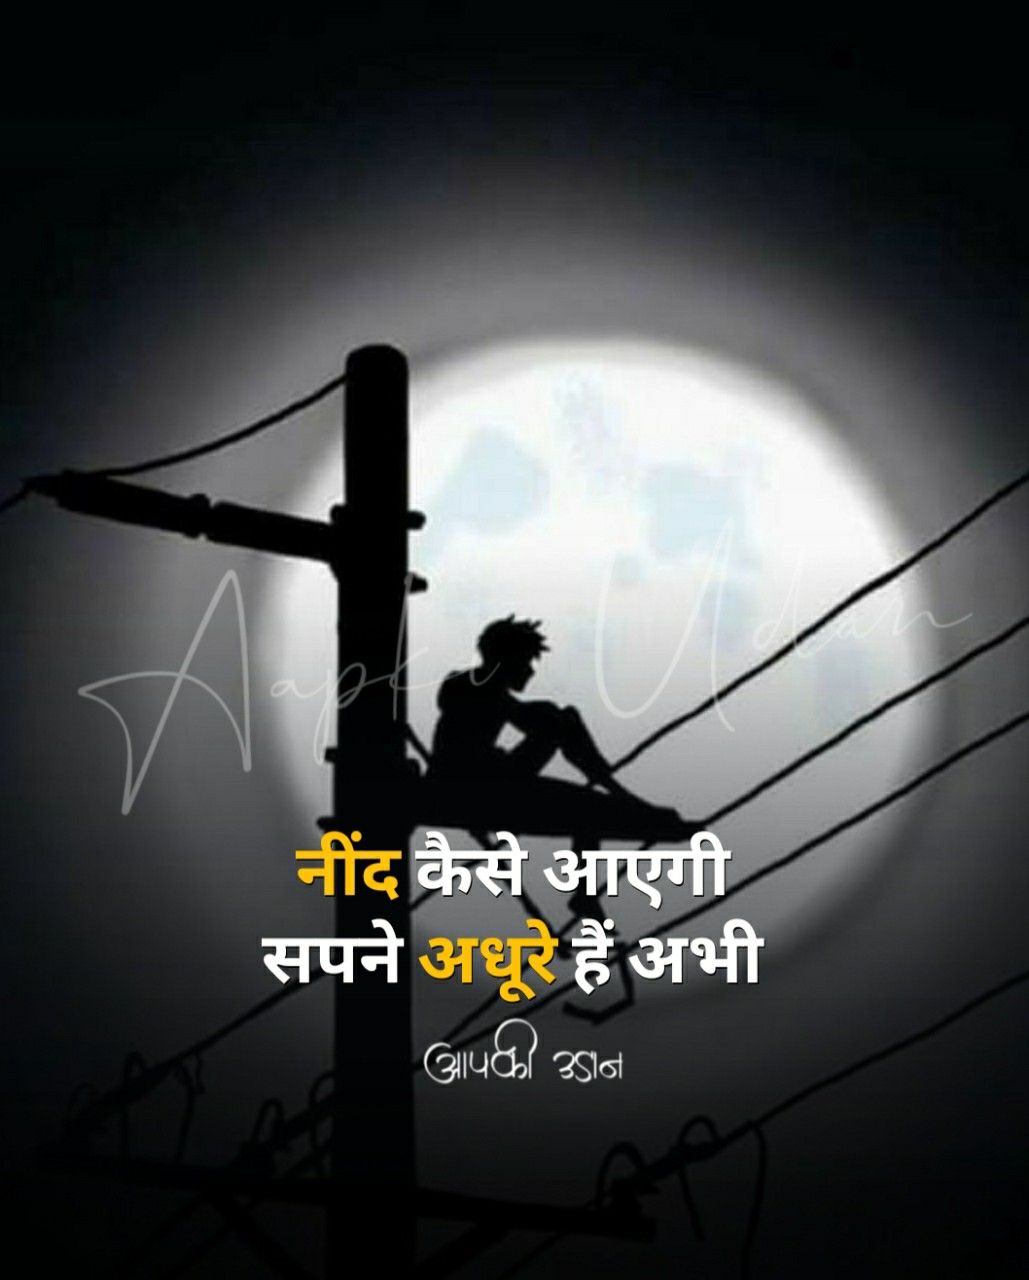 Positive Quotes in Hindi for life
